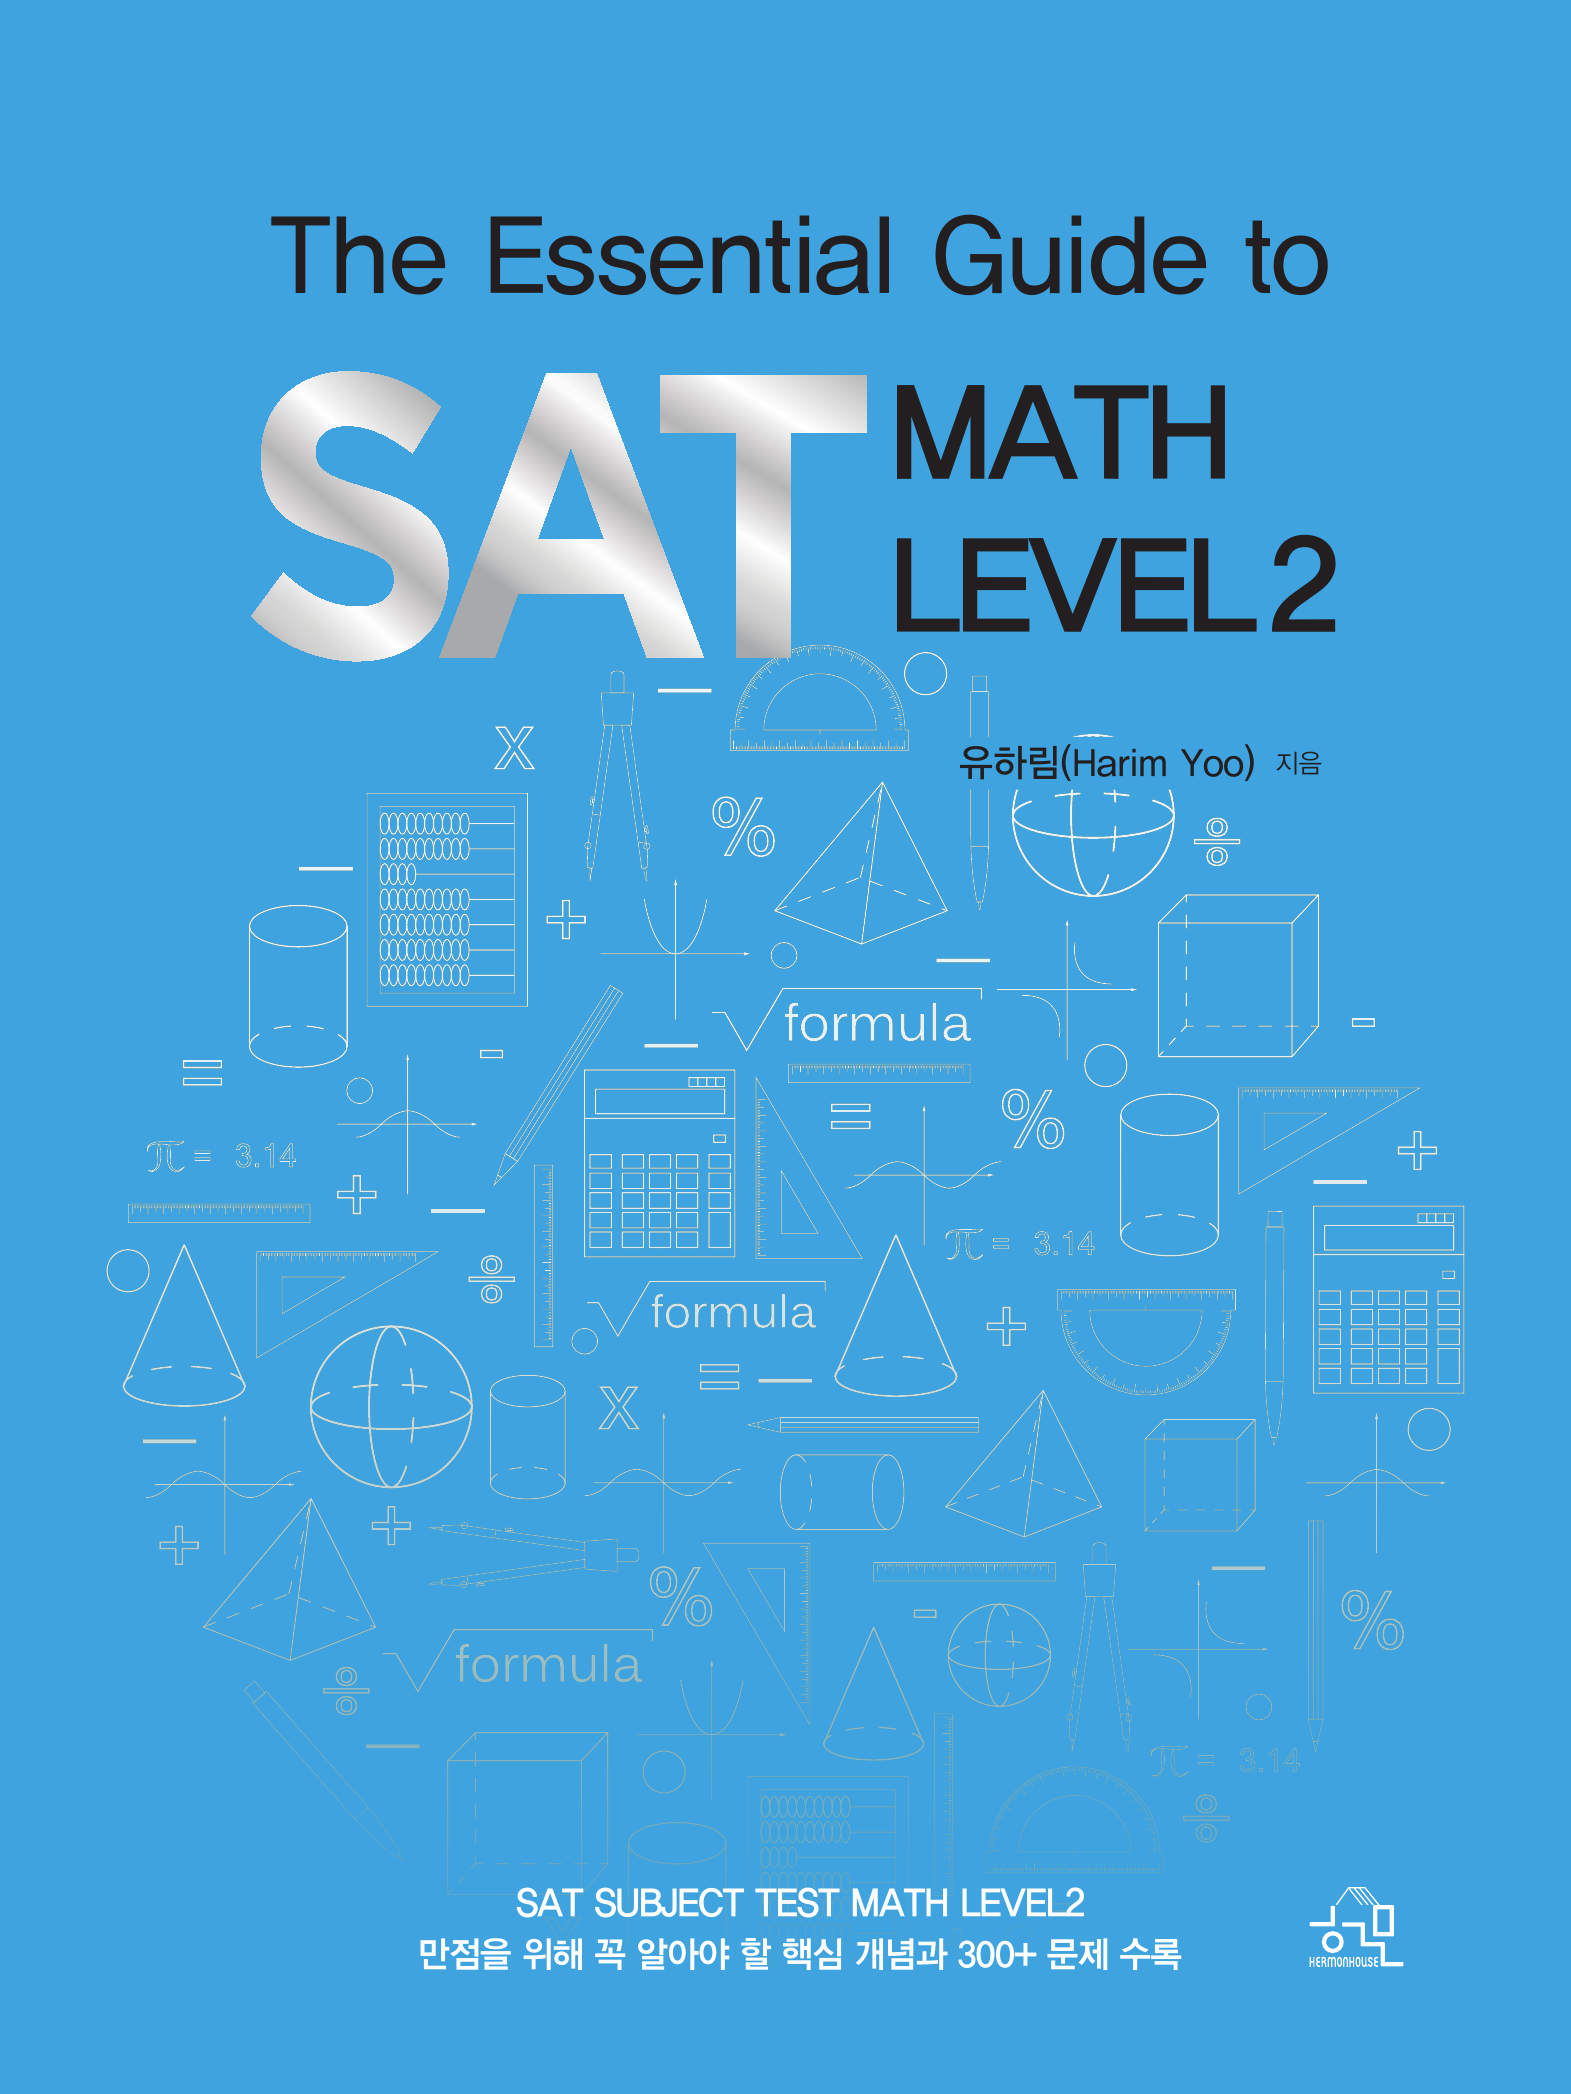 THE ESSENTIAL GUIDE TO SAT MATH LEVEL 2